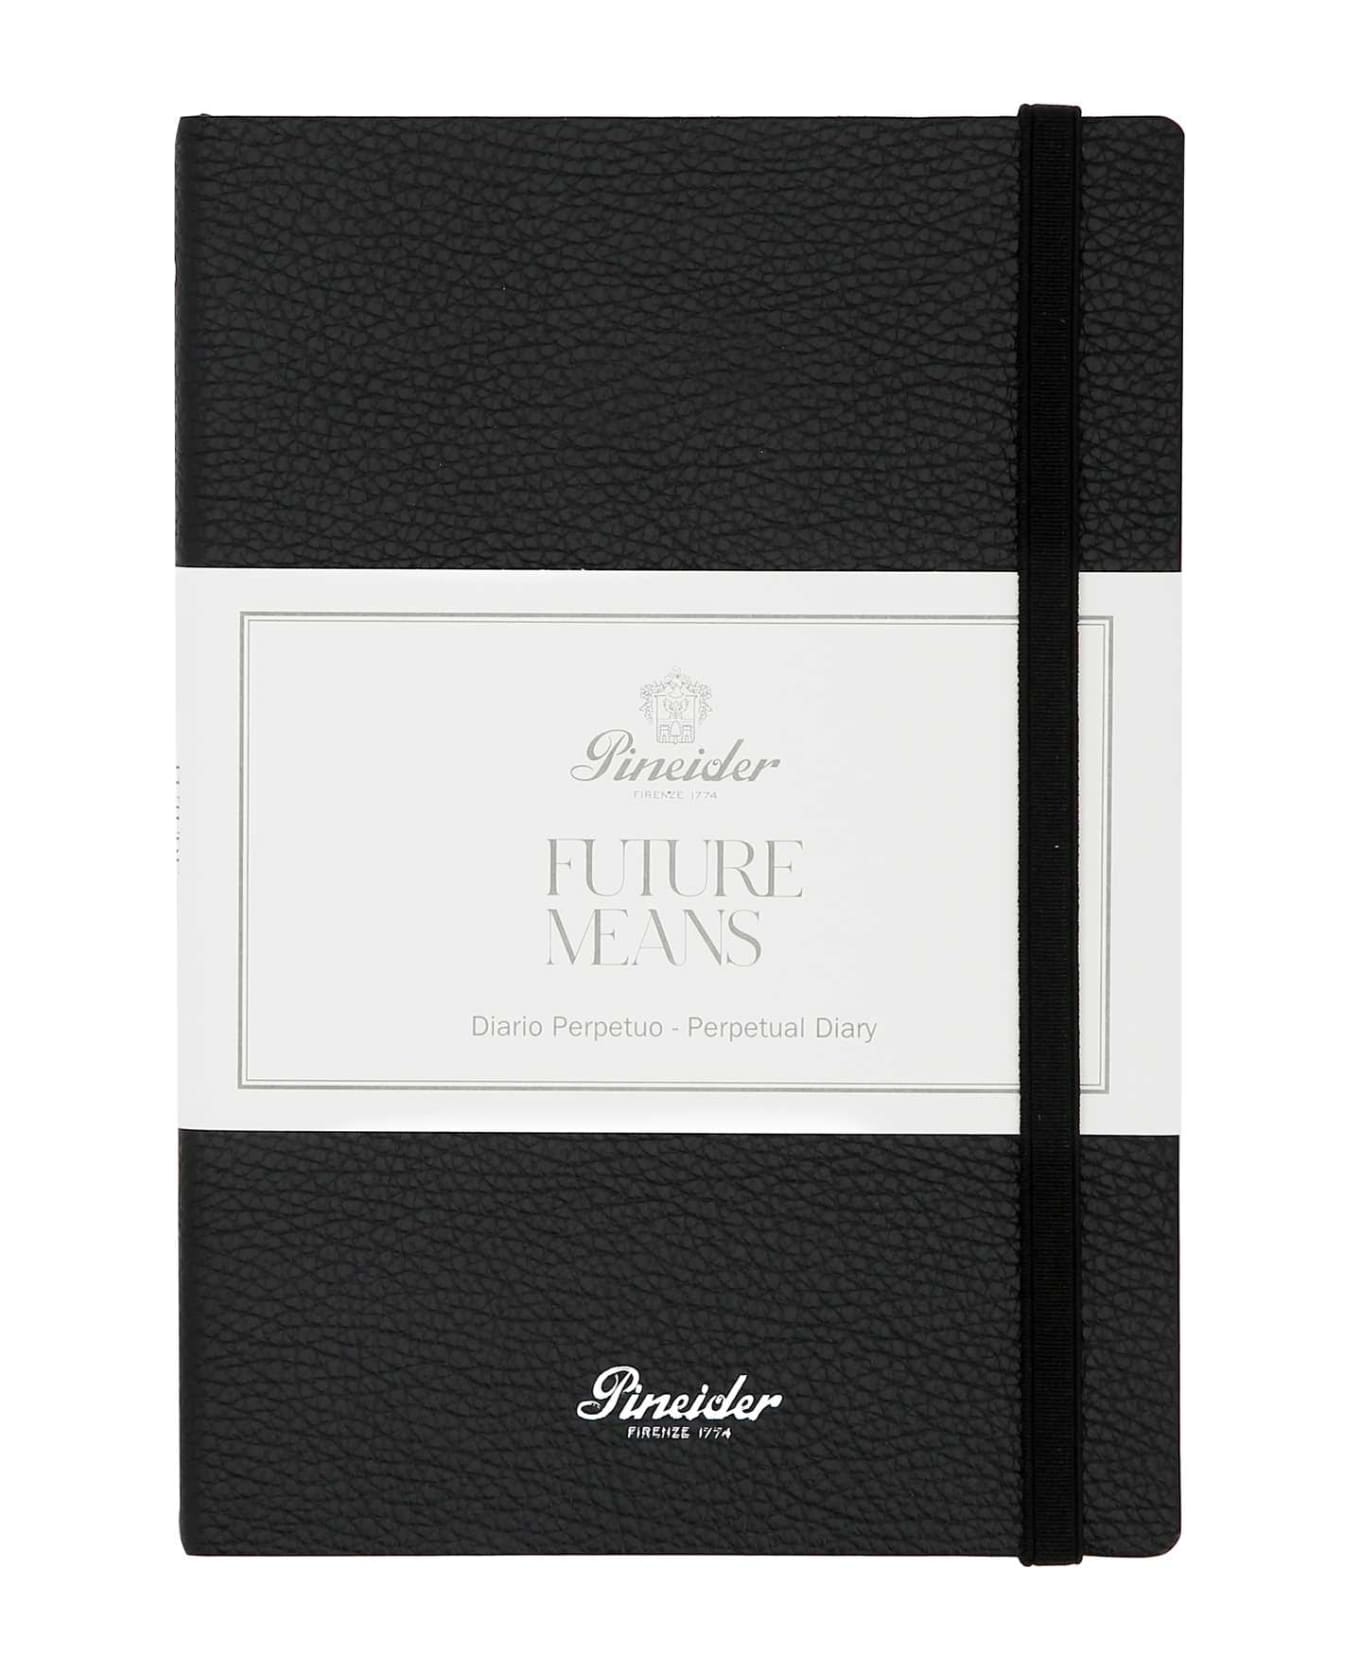 Pineider Black Leather Future Means Diary - BLACK